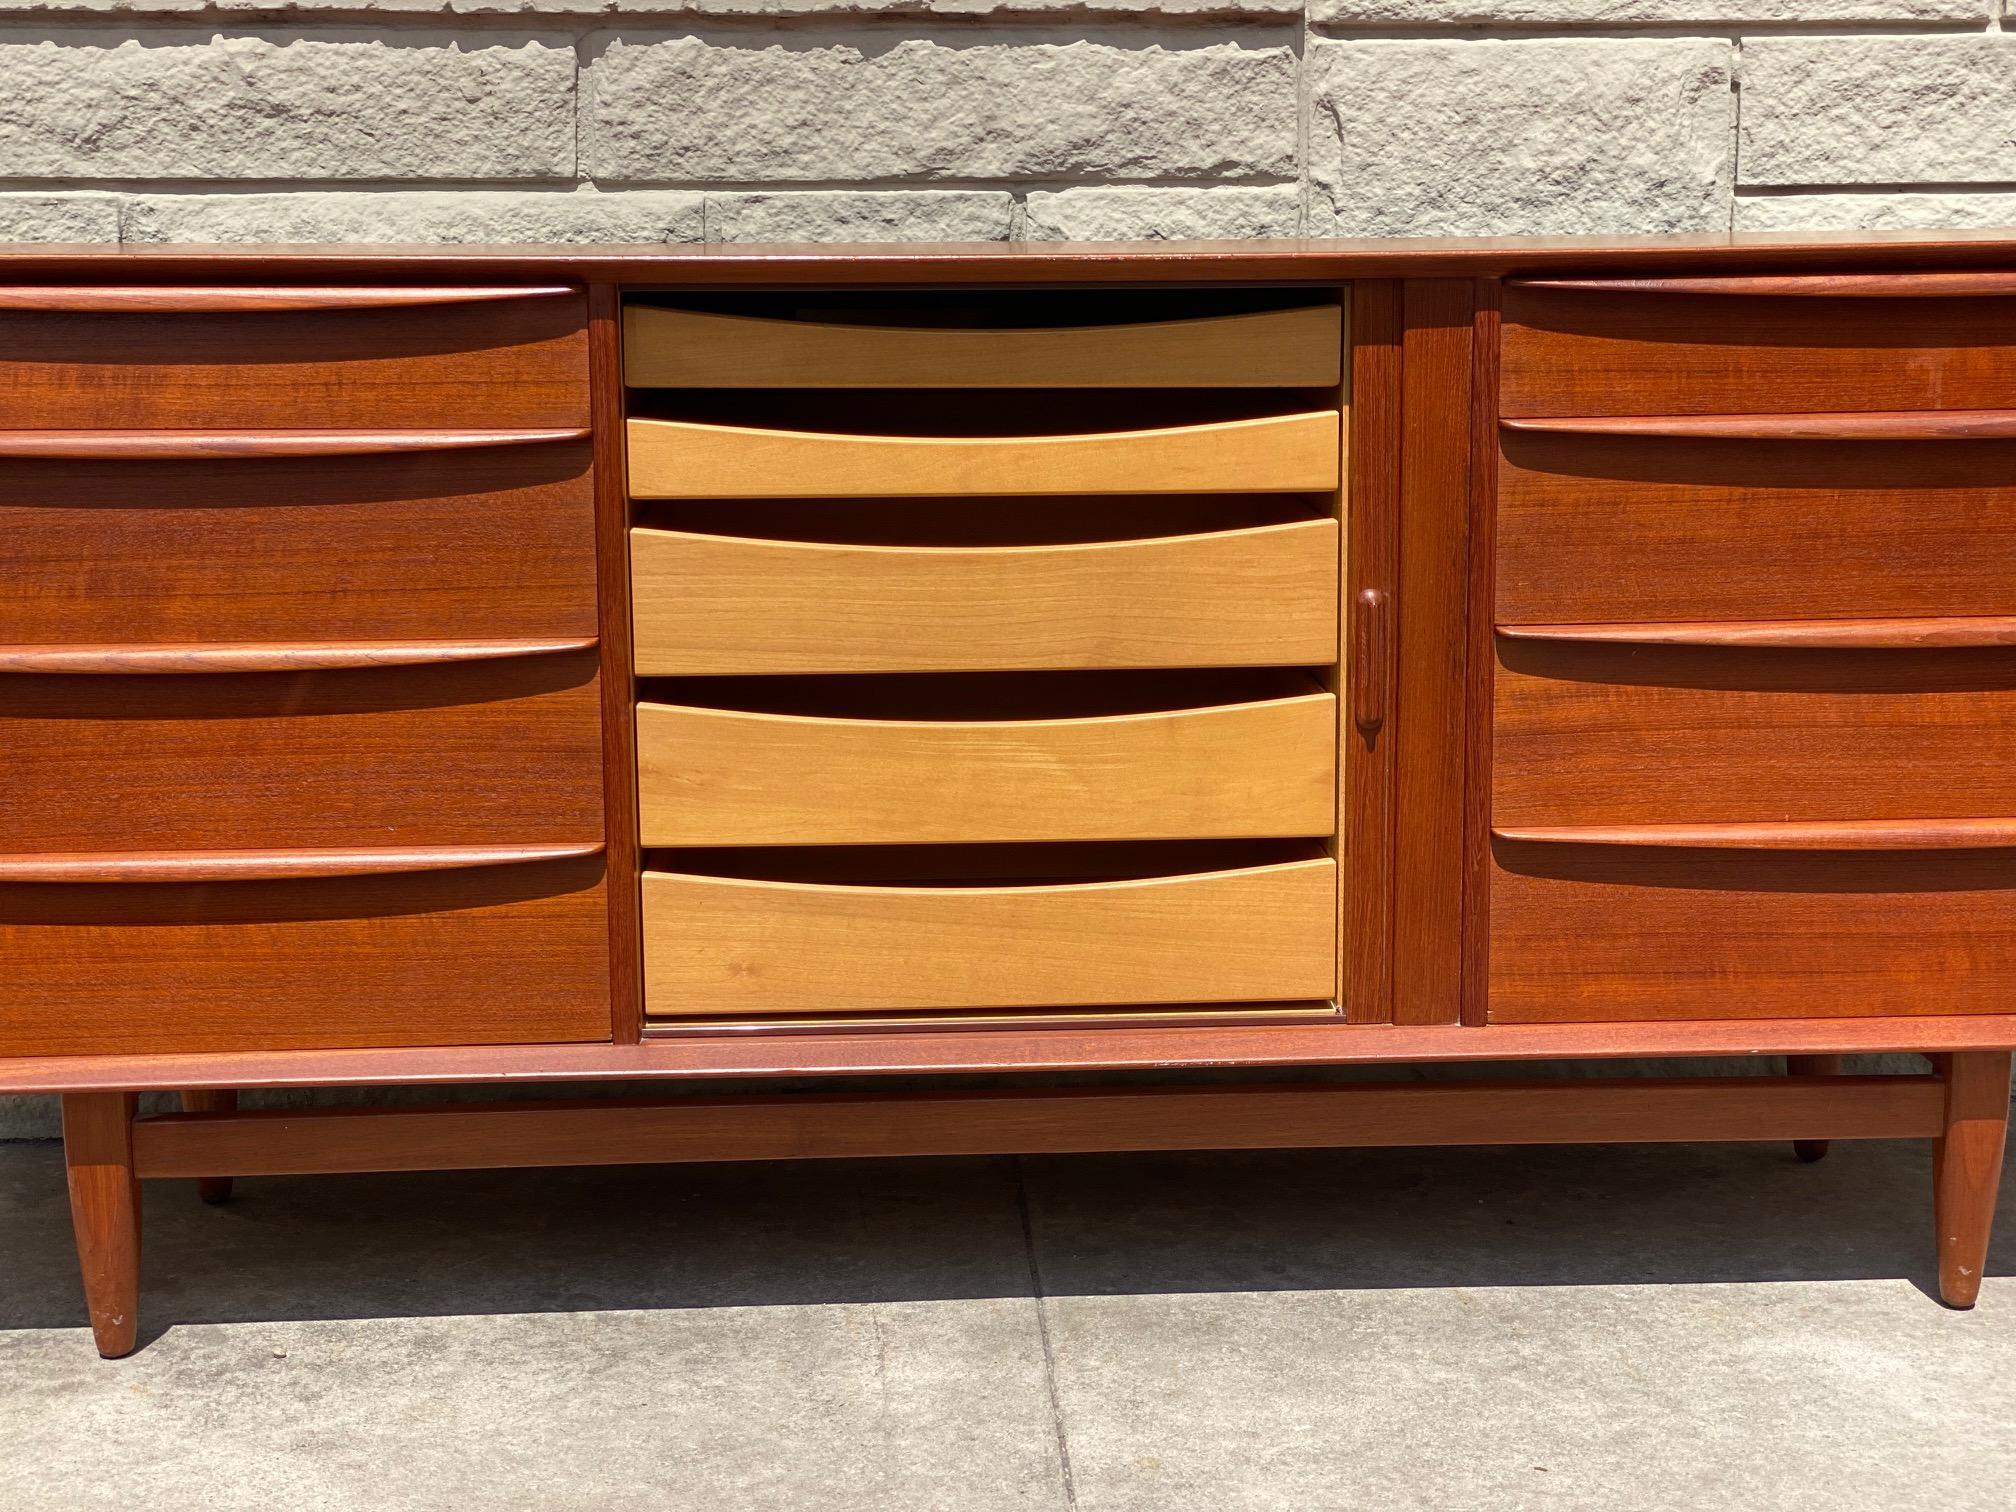 Danish long dresser in teak with tambour door features eight exposed drawers with center tambour section which opens to more interior drawers. This is perfect for garment storage or to be used as a credenza for any interior space. This long dresser